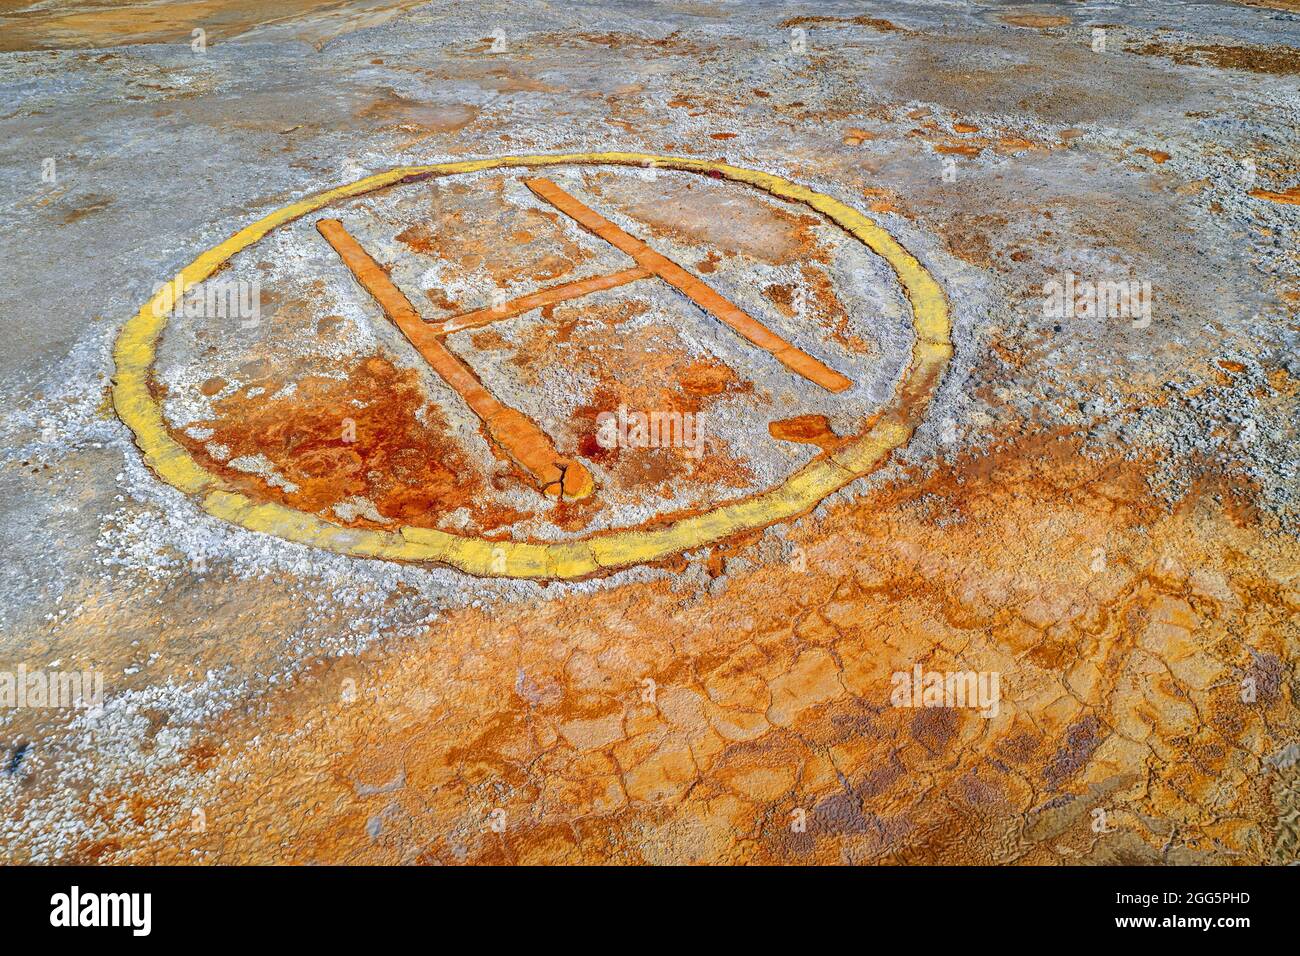 Rusty helipad sign over contaminated ground of abandoned mining area, dystopian background Stock Photo